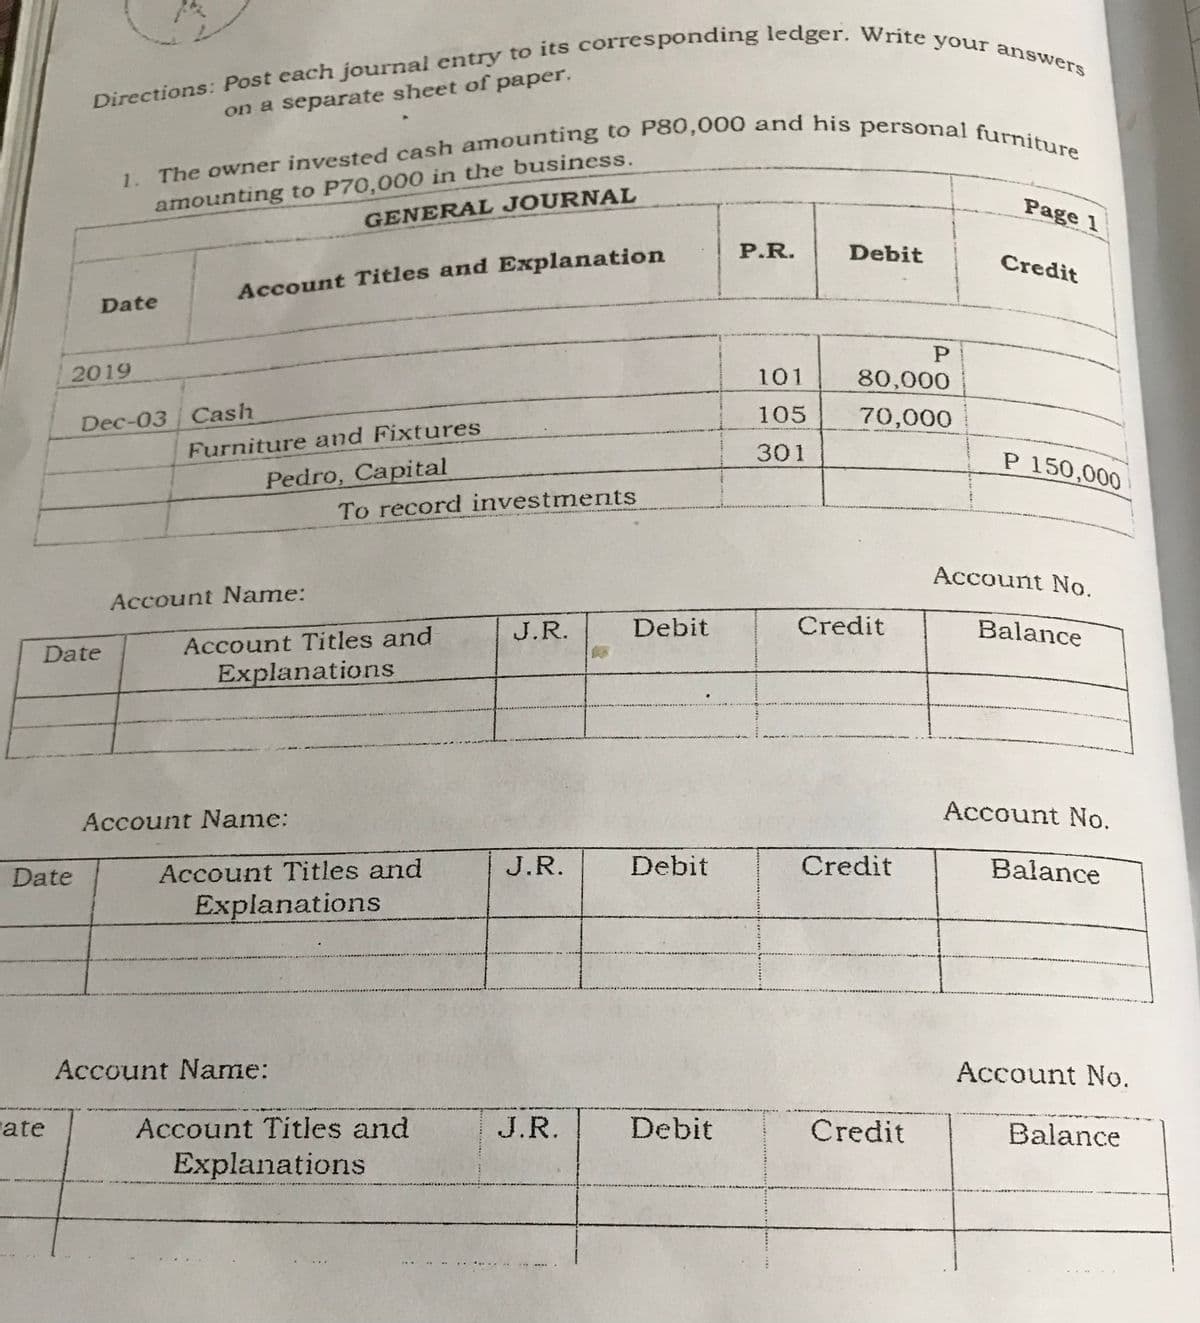 on a separate sheet of paper,
amounting to P70,000 in the business.
GENERAL JOURNAL
1.
Page 1
P.R.
Debit
Credit
Account Titles and Explanation
Date
2019
101
80,000
Dec-03 Cash
105
70,000
Furniture and Fixtures
301
P 150,000
Pedro, Capital
To record investments
Account No.
Account Name:
J.R.
Debit
Credit
Balance
Date
Account Titles and
Explanations
Account No.
Account Name:
Date
Account Titles and
J.R.
Debit
Credit
Balance
Explanations
Account Name:
Account No.
ate
Account Titles and
J.R.
Debit
Credit
Balance
Explanations
